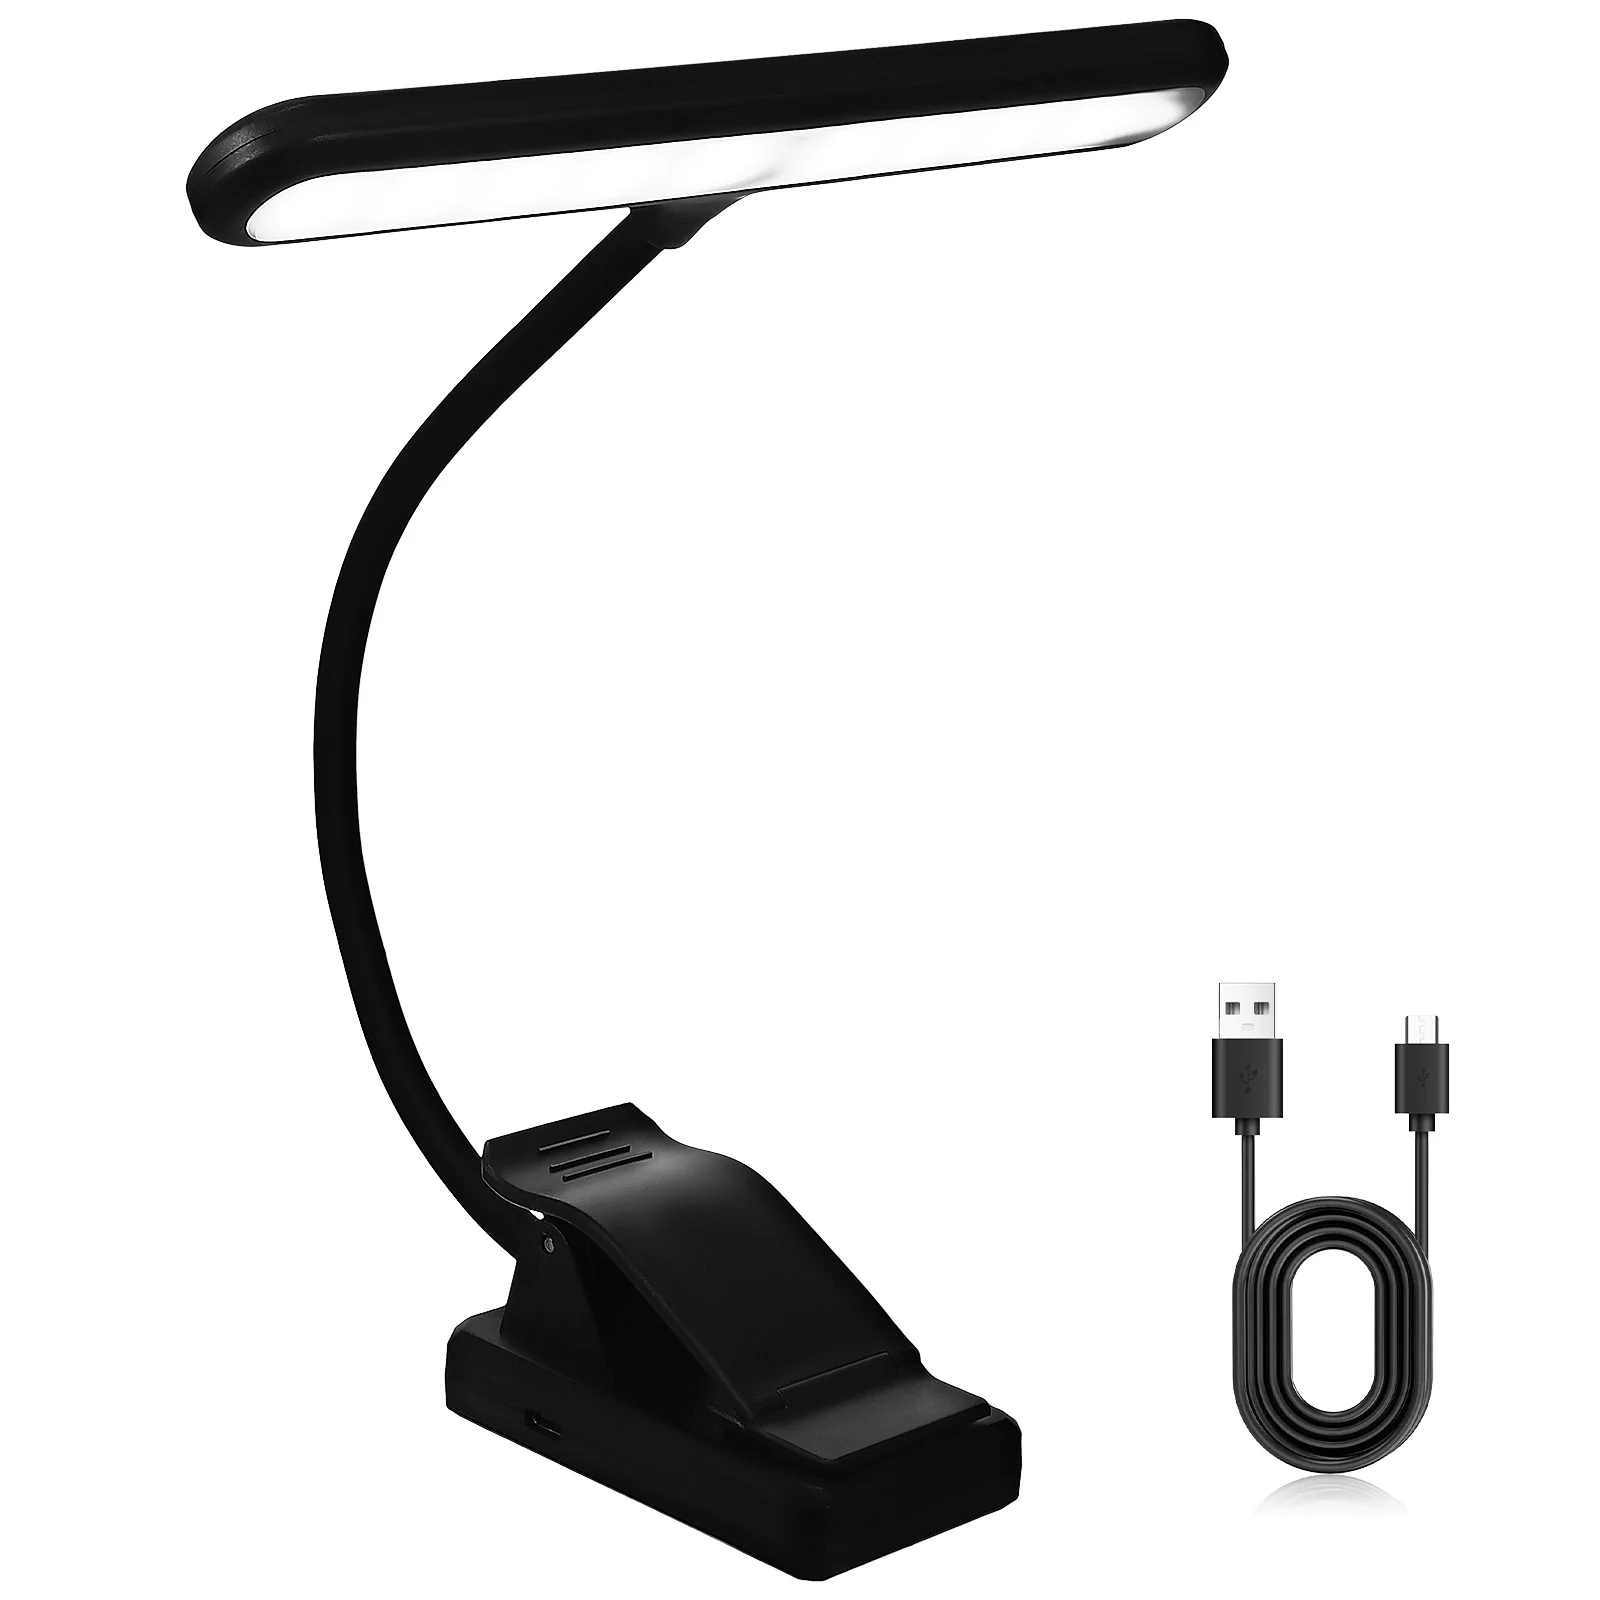 

LED Music Light Keyboard Clip on Reading Lights Desk Lamp for Books USB Piano Upright Table